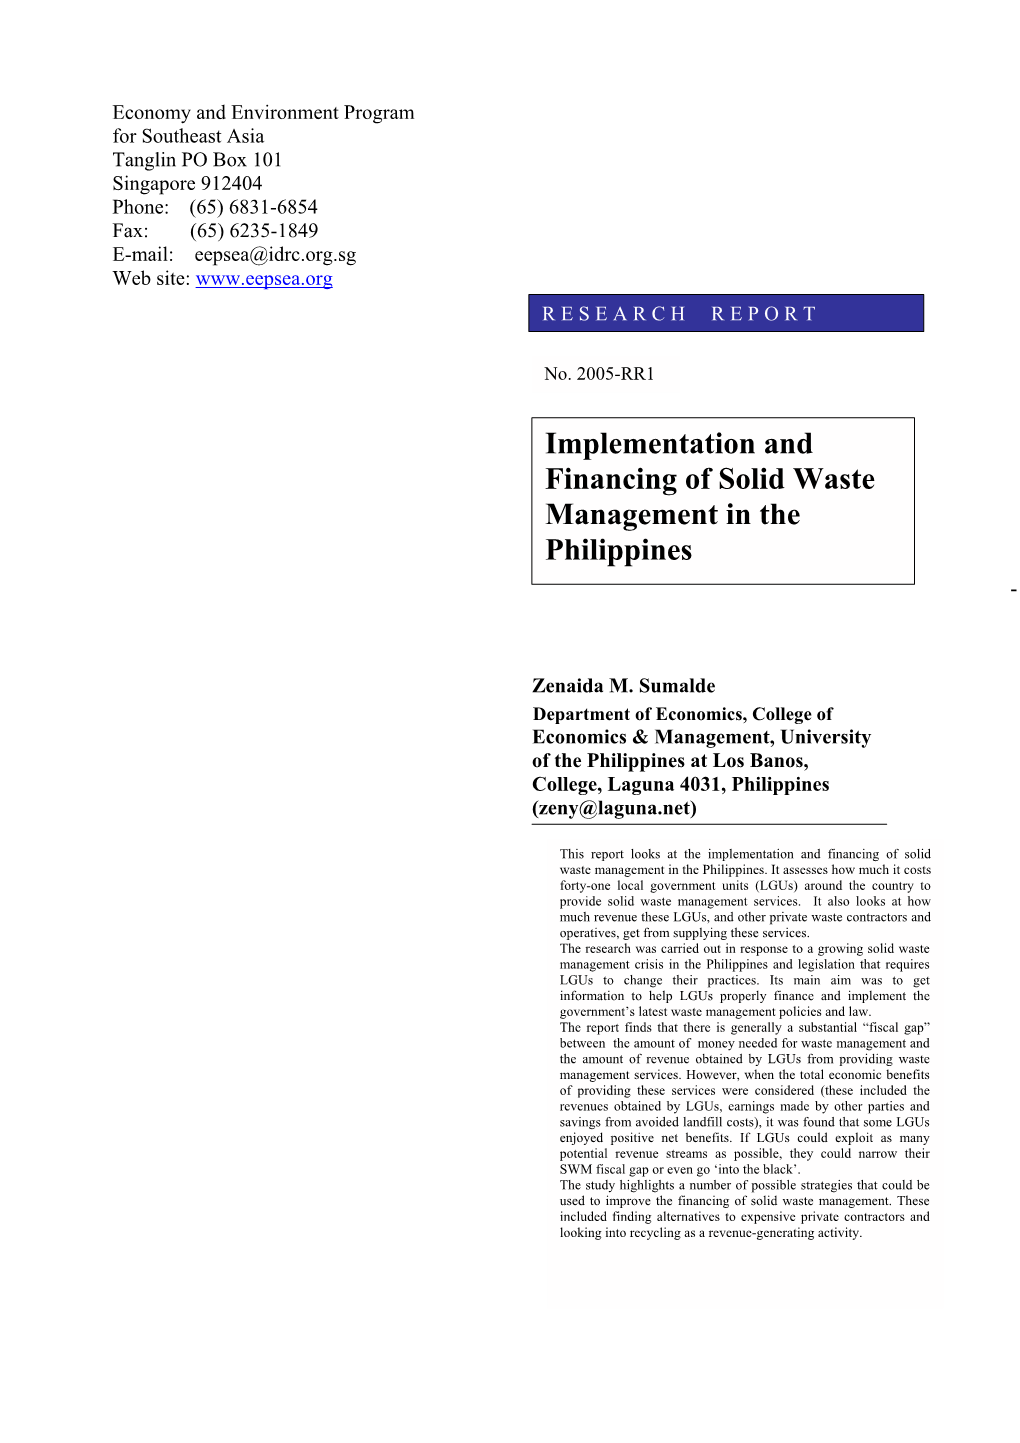 Implementation and Financing of Solid Waste Management in the Philippines